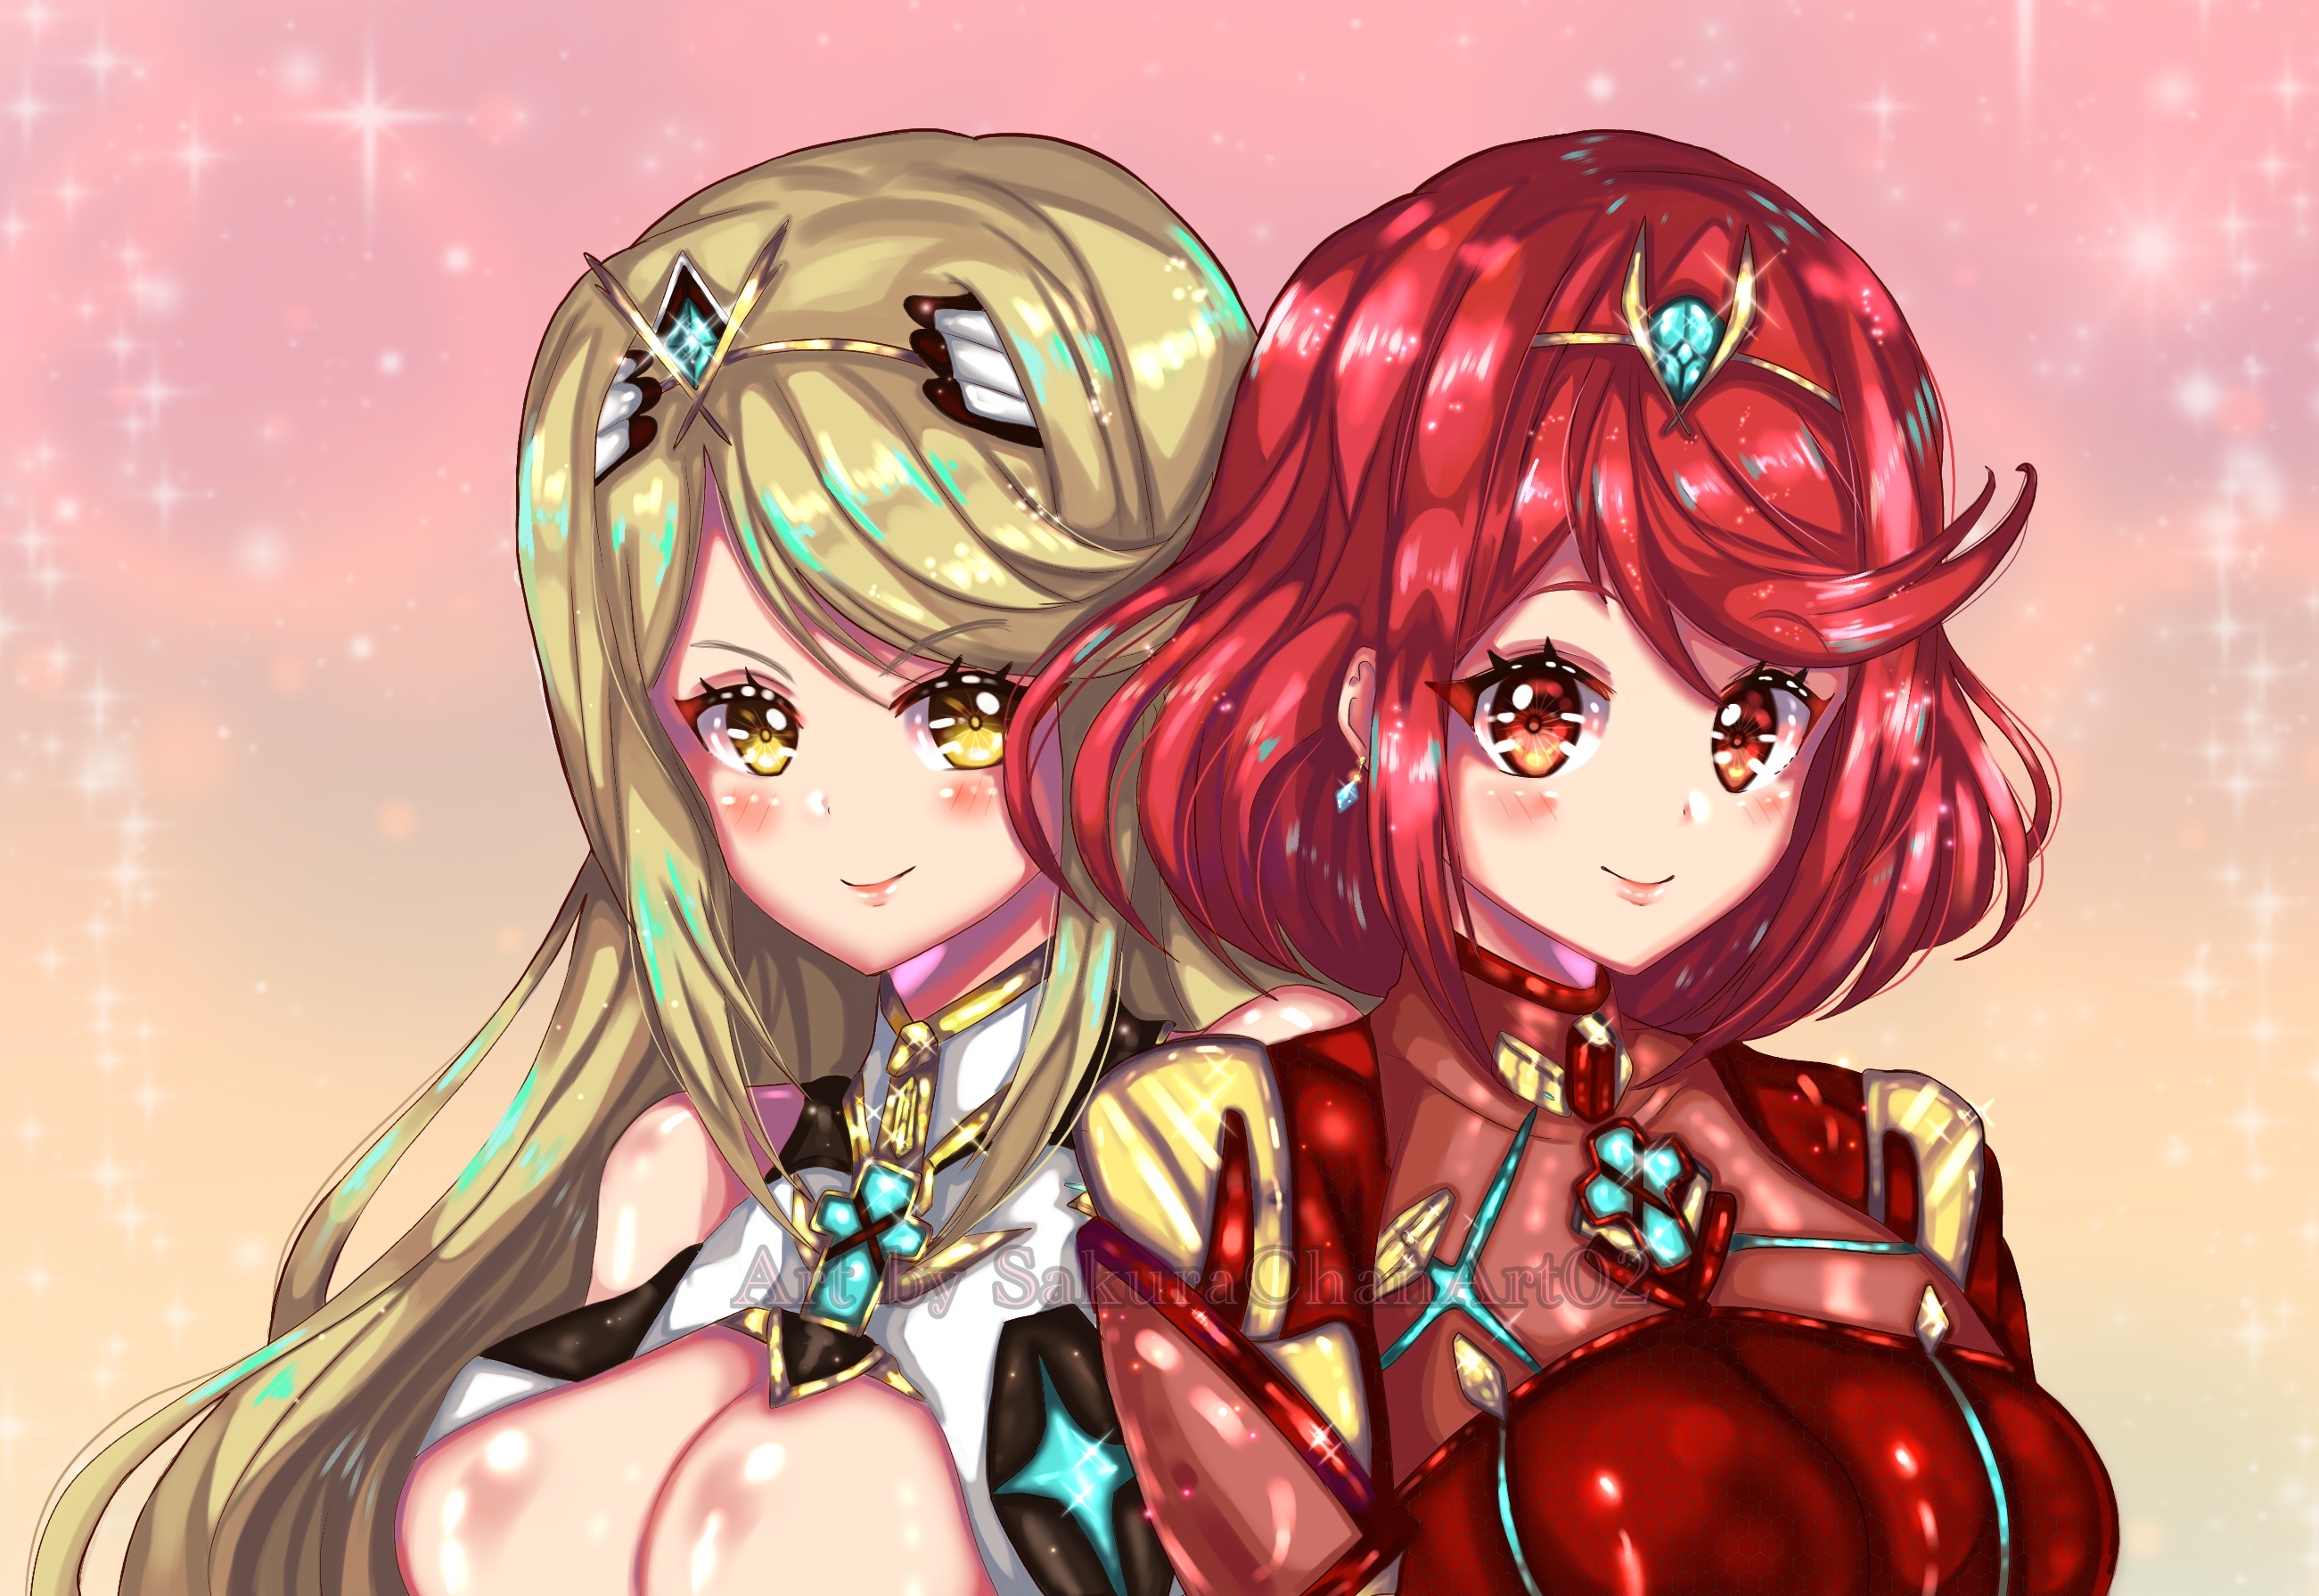 Pyra with blonde hair - Fanart - wide 4